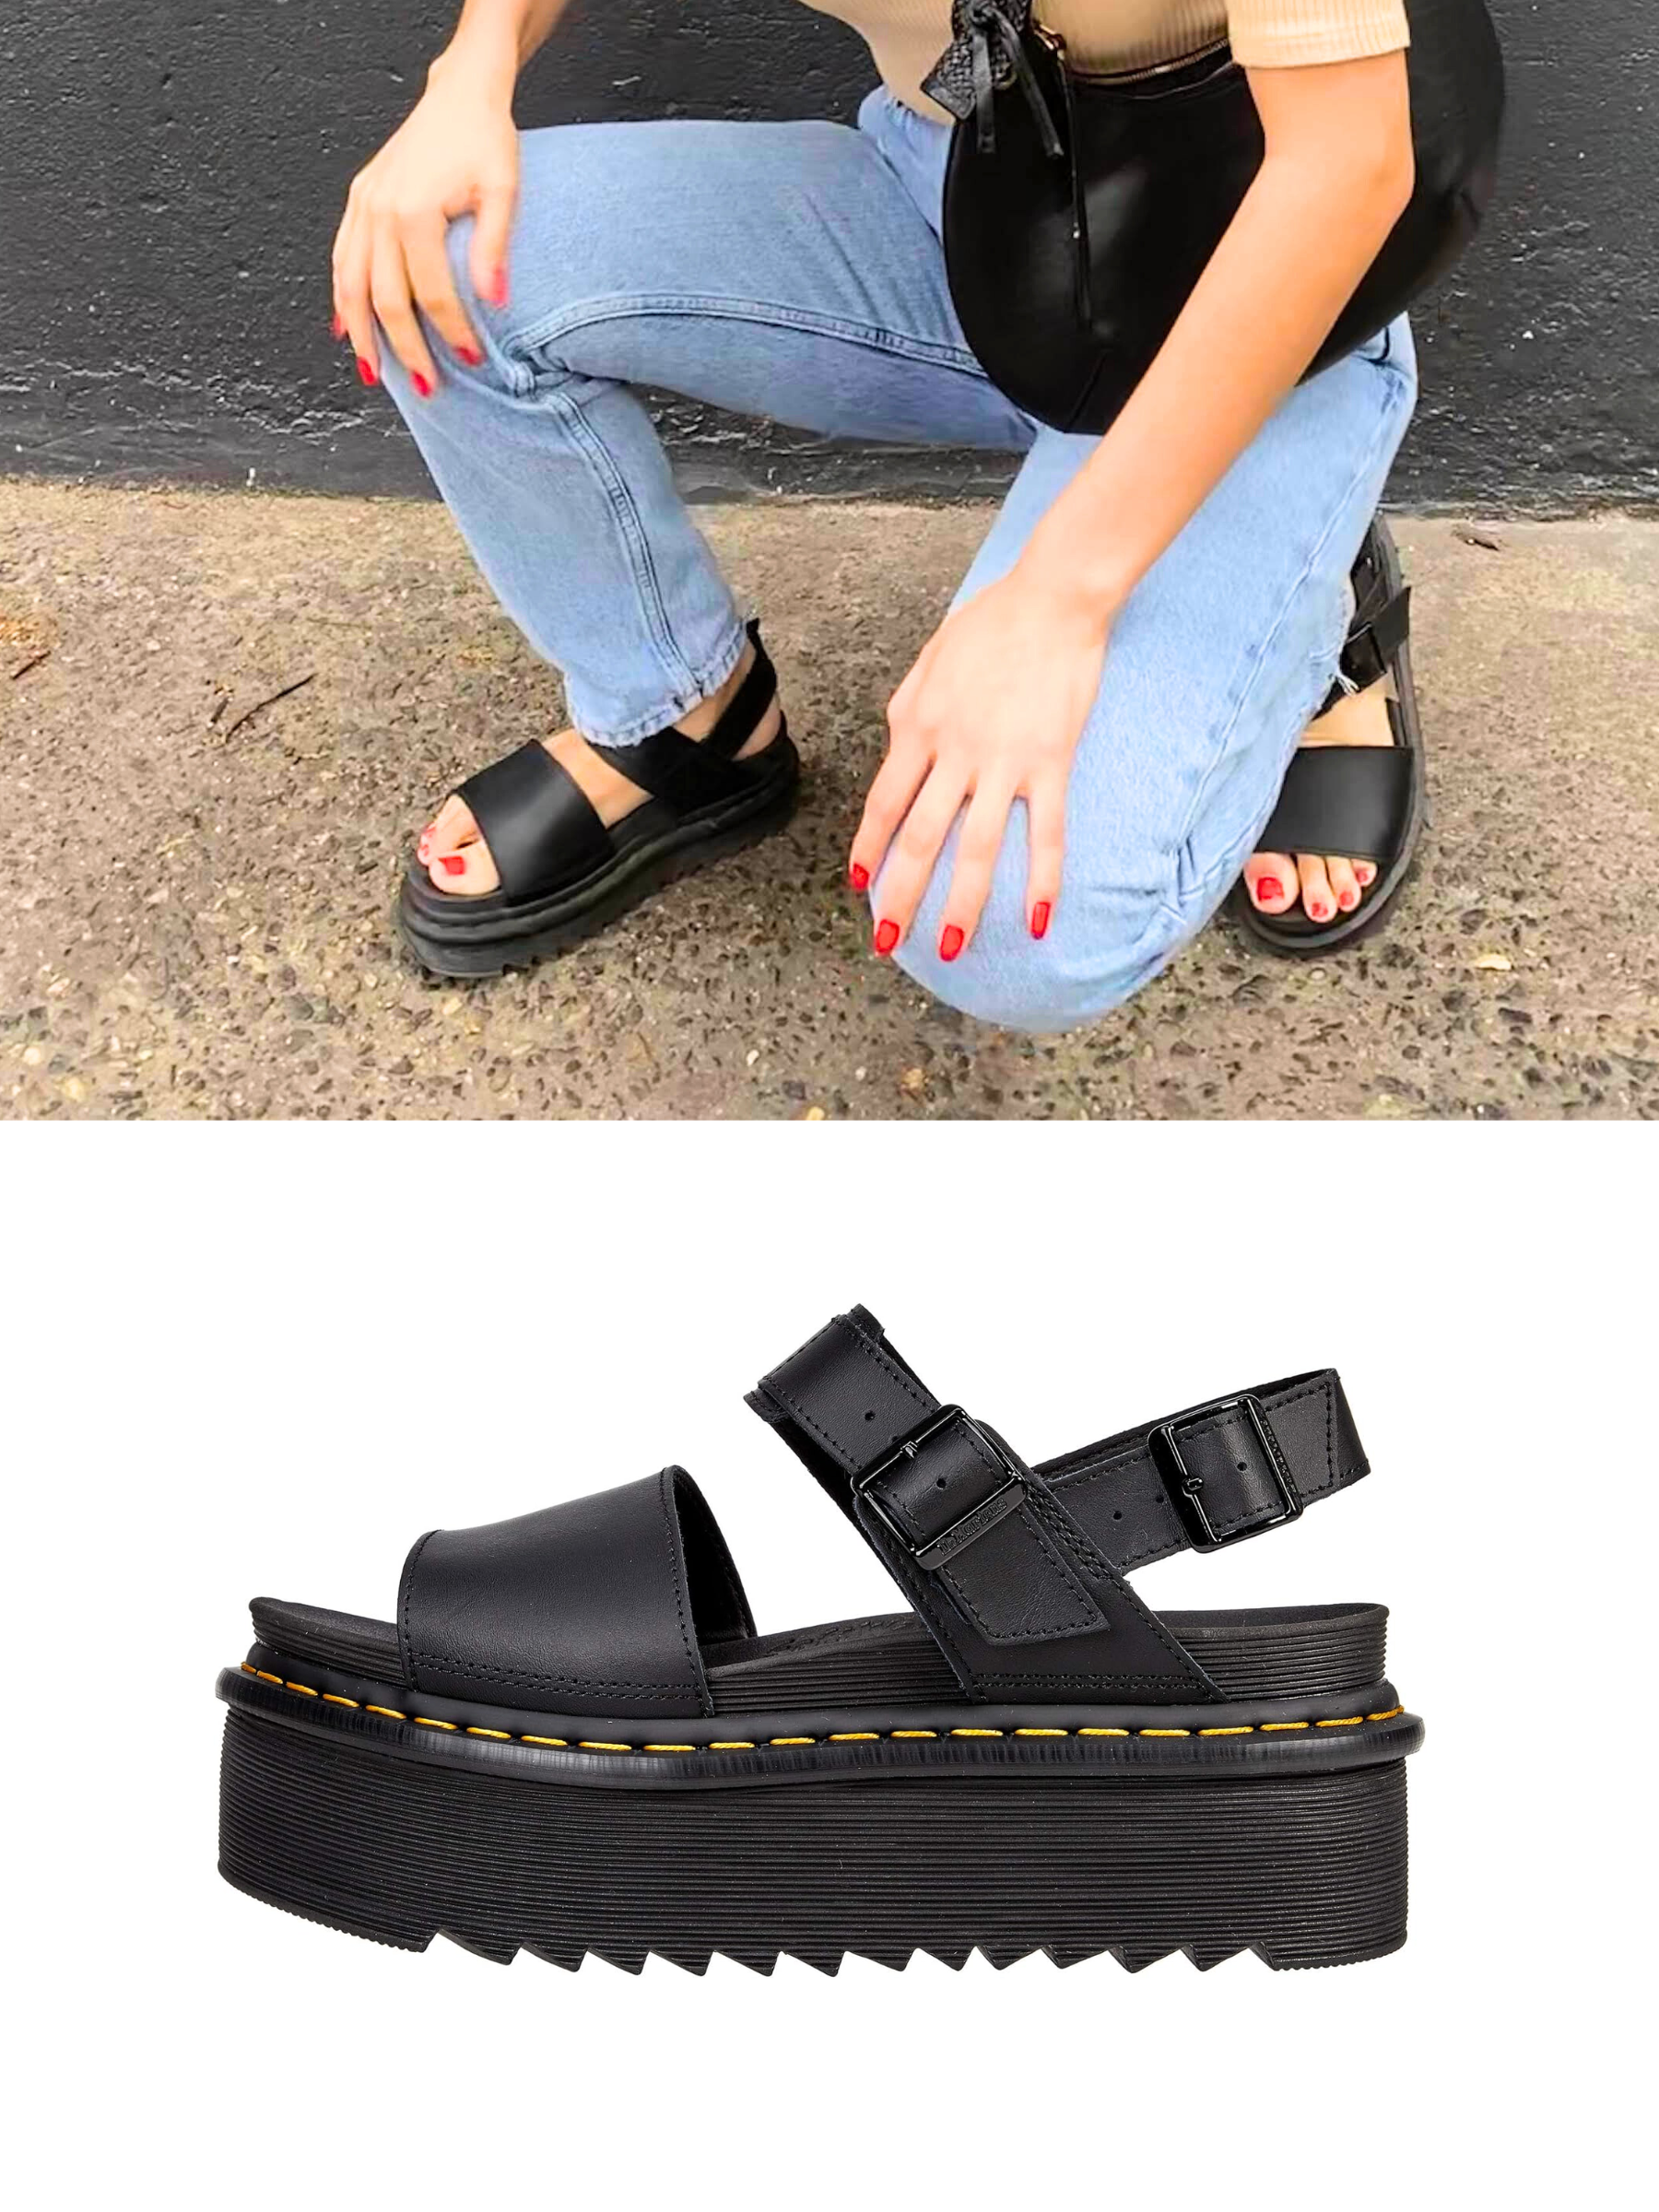 21 Best Walking Sandals for Women, According to Glamour Editors